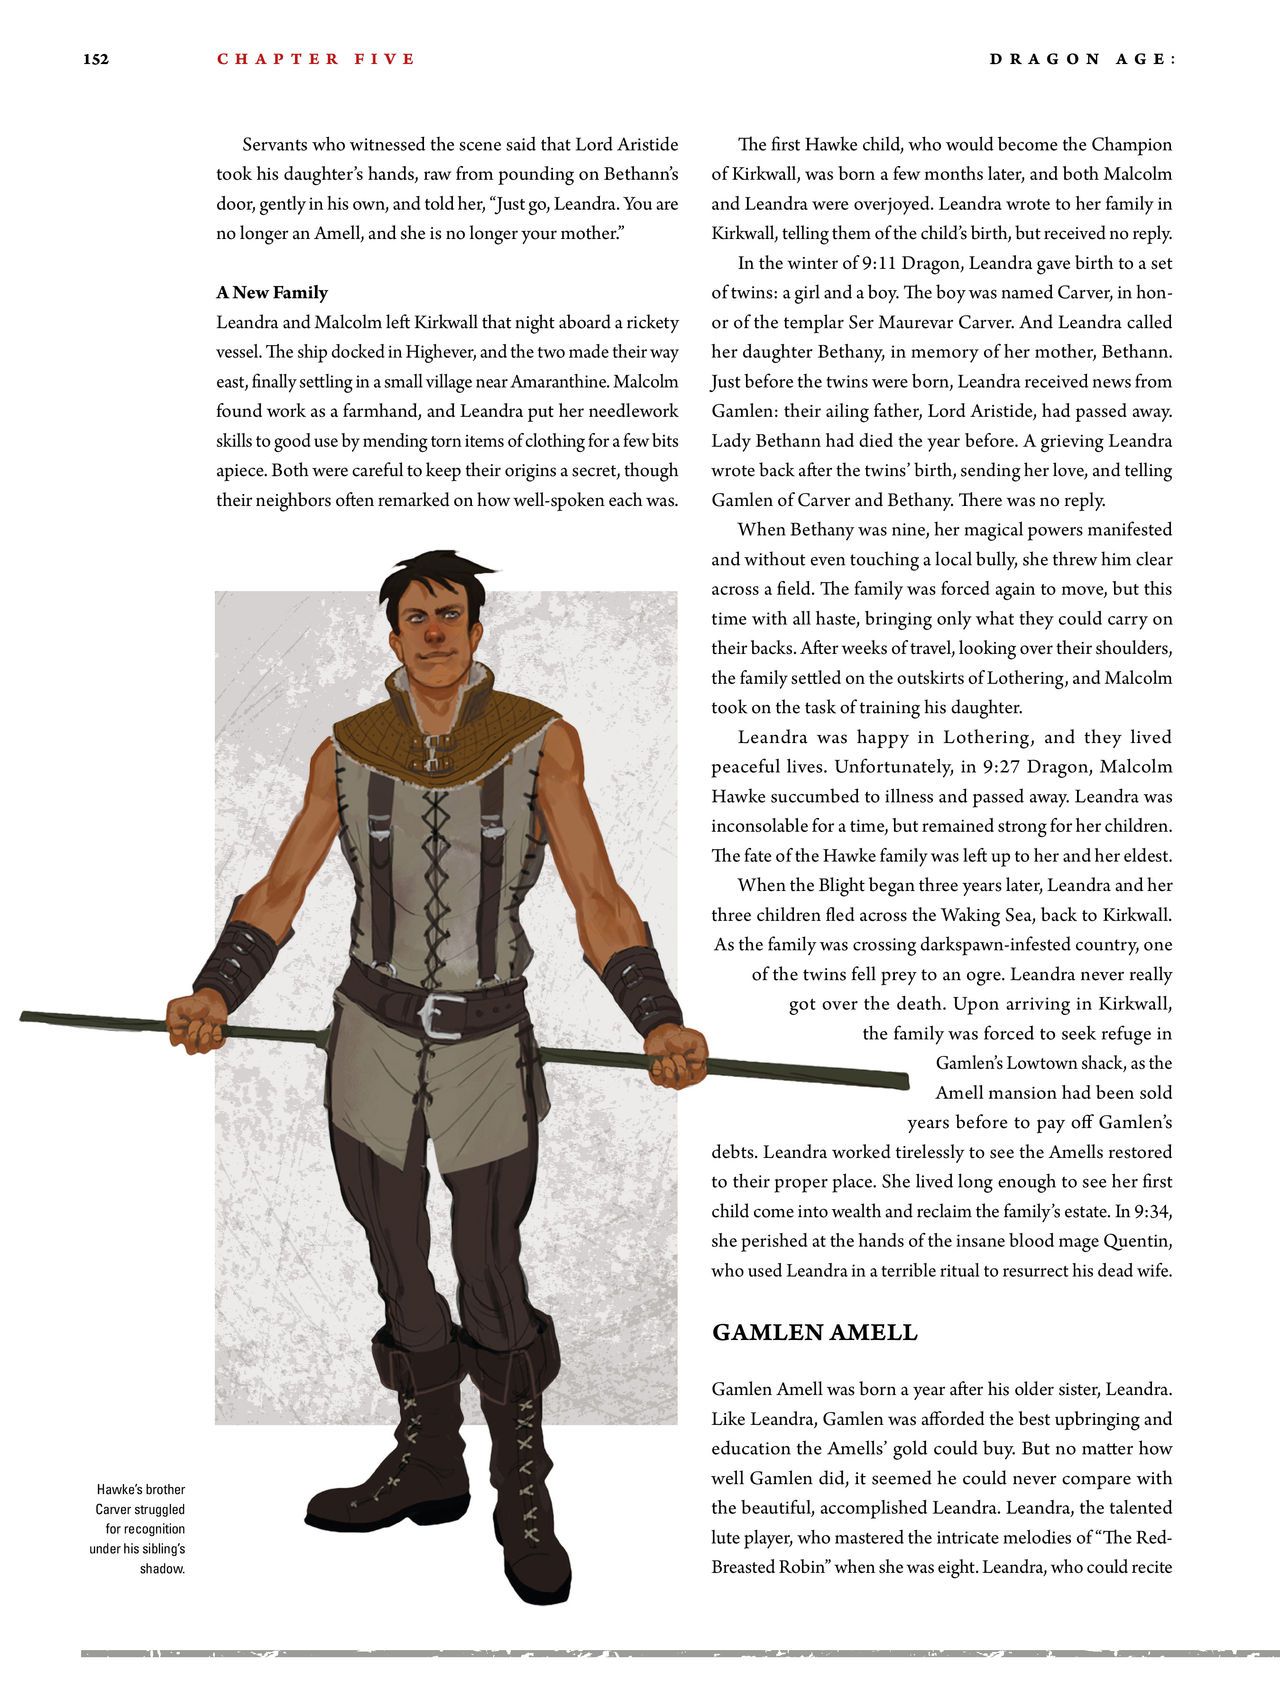 Dragon Age - The World of Thedas v02 148